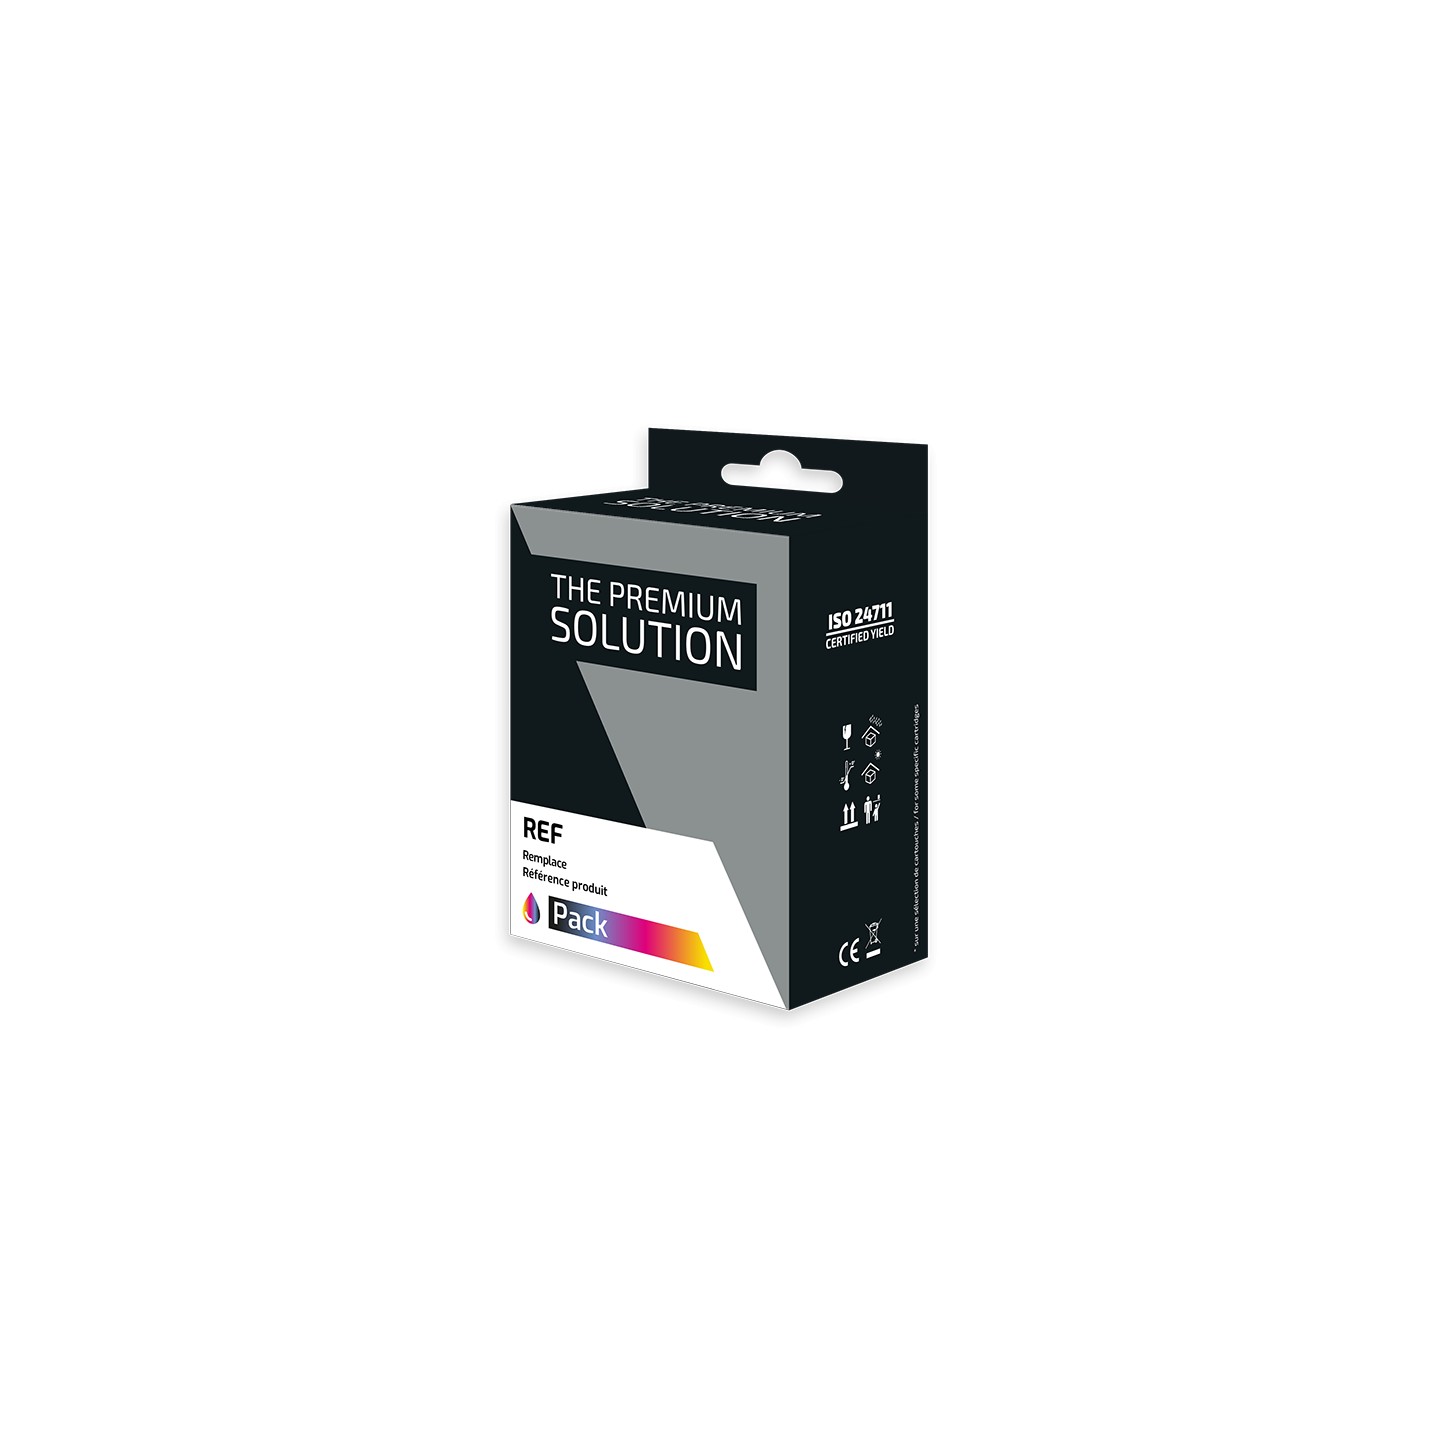 Brother 421 - Pack x 4 jet d'encre compatible avec LC421VAL - Black Cyan Magenta Yellow